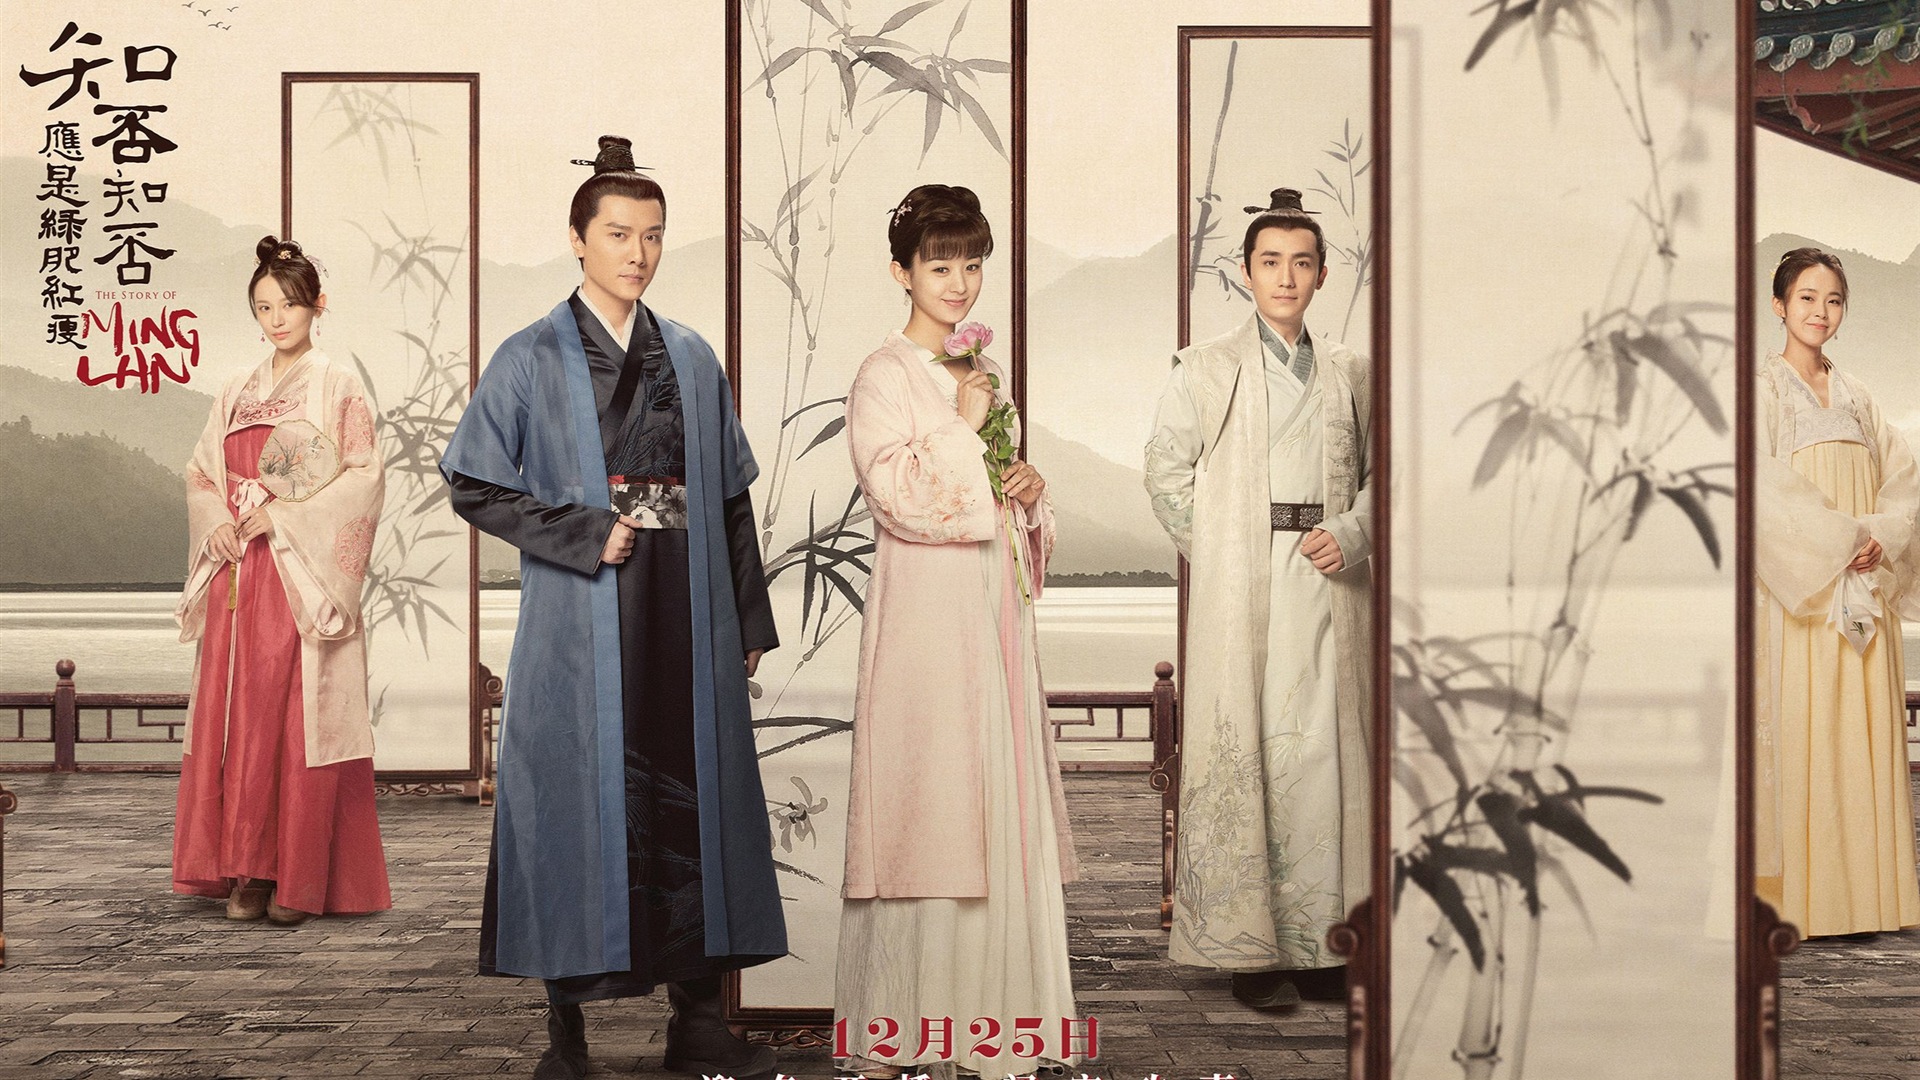 The Story Of MingLan, TV series HD wallpapers #35 - 1920x1080